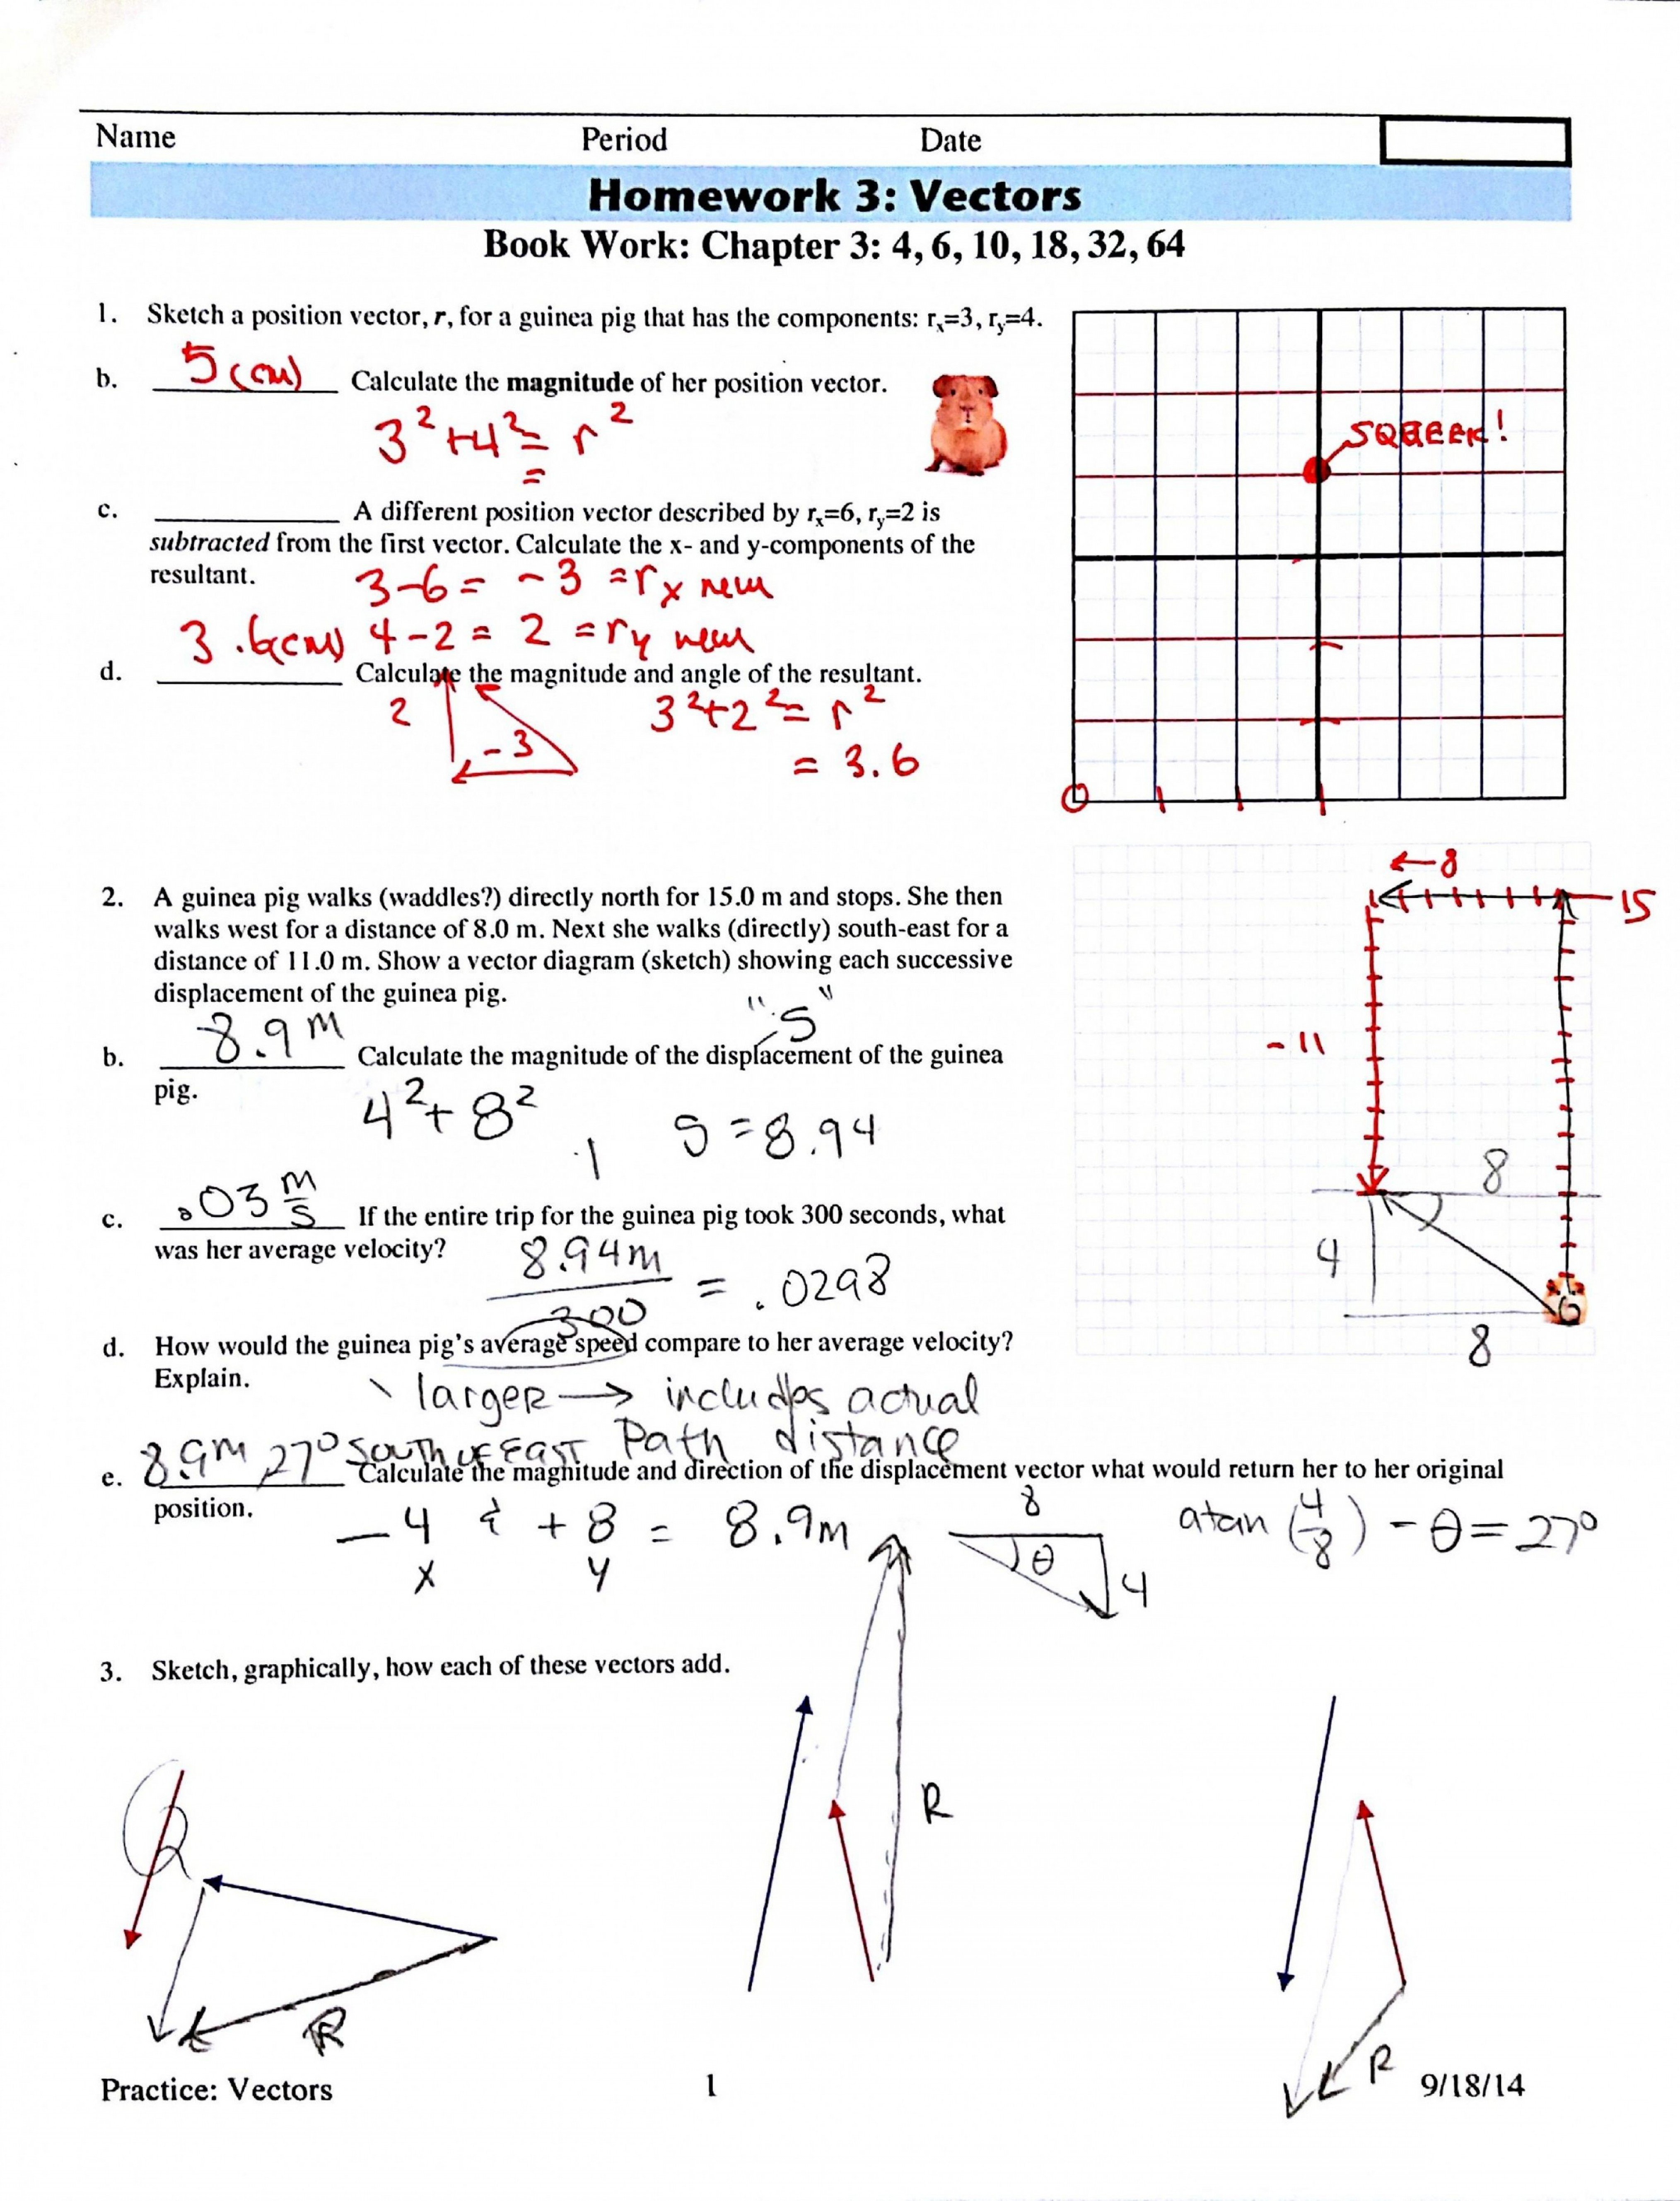 Top Vector Addition Worksheet With Answers Image L Ca  Cqrecords With Regard To Vector Addition Worksheet